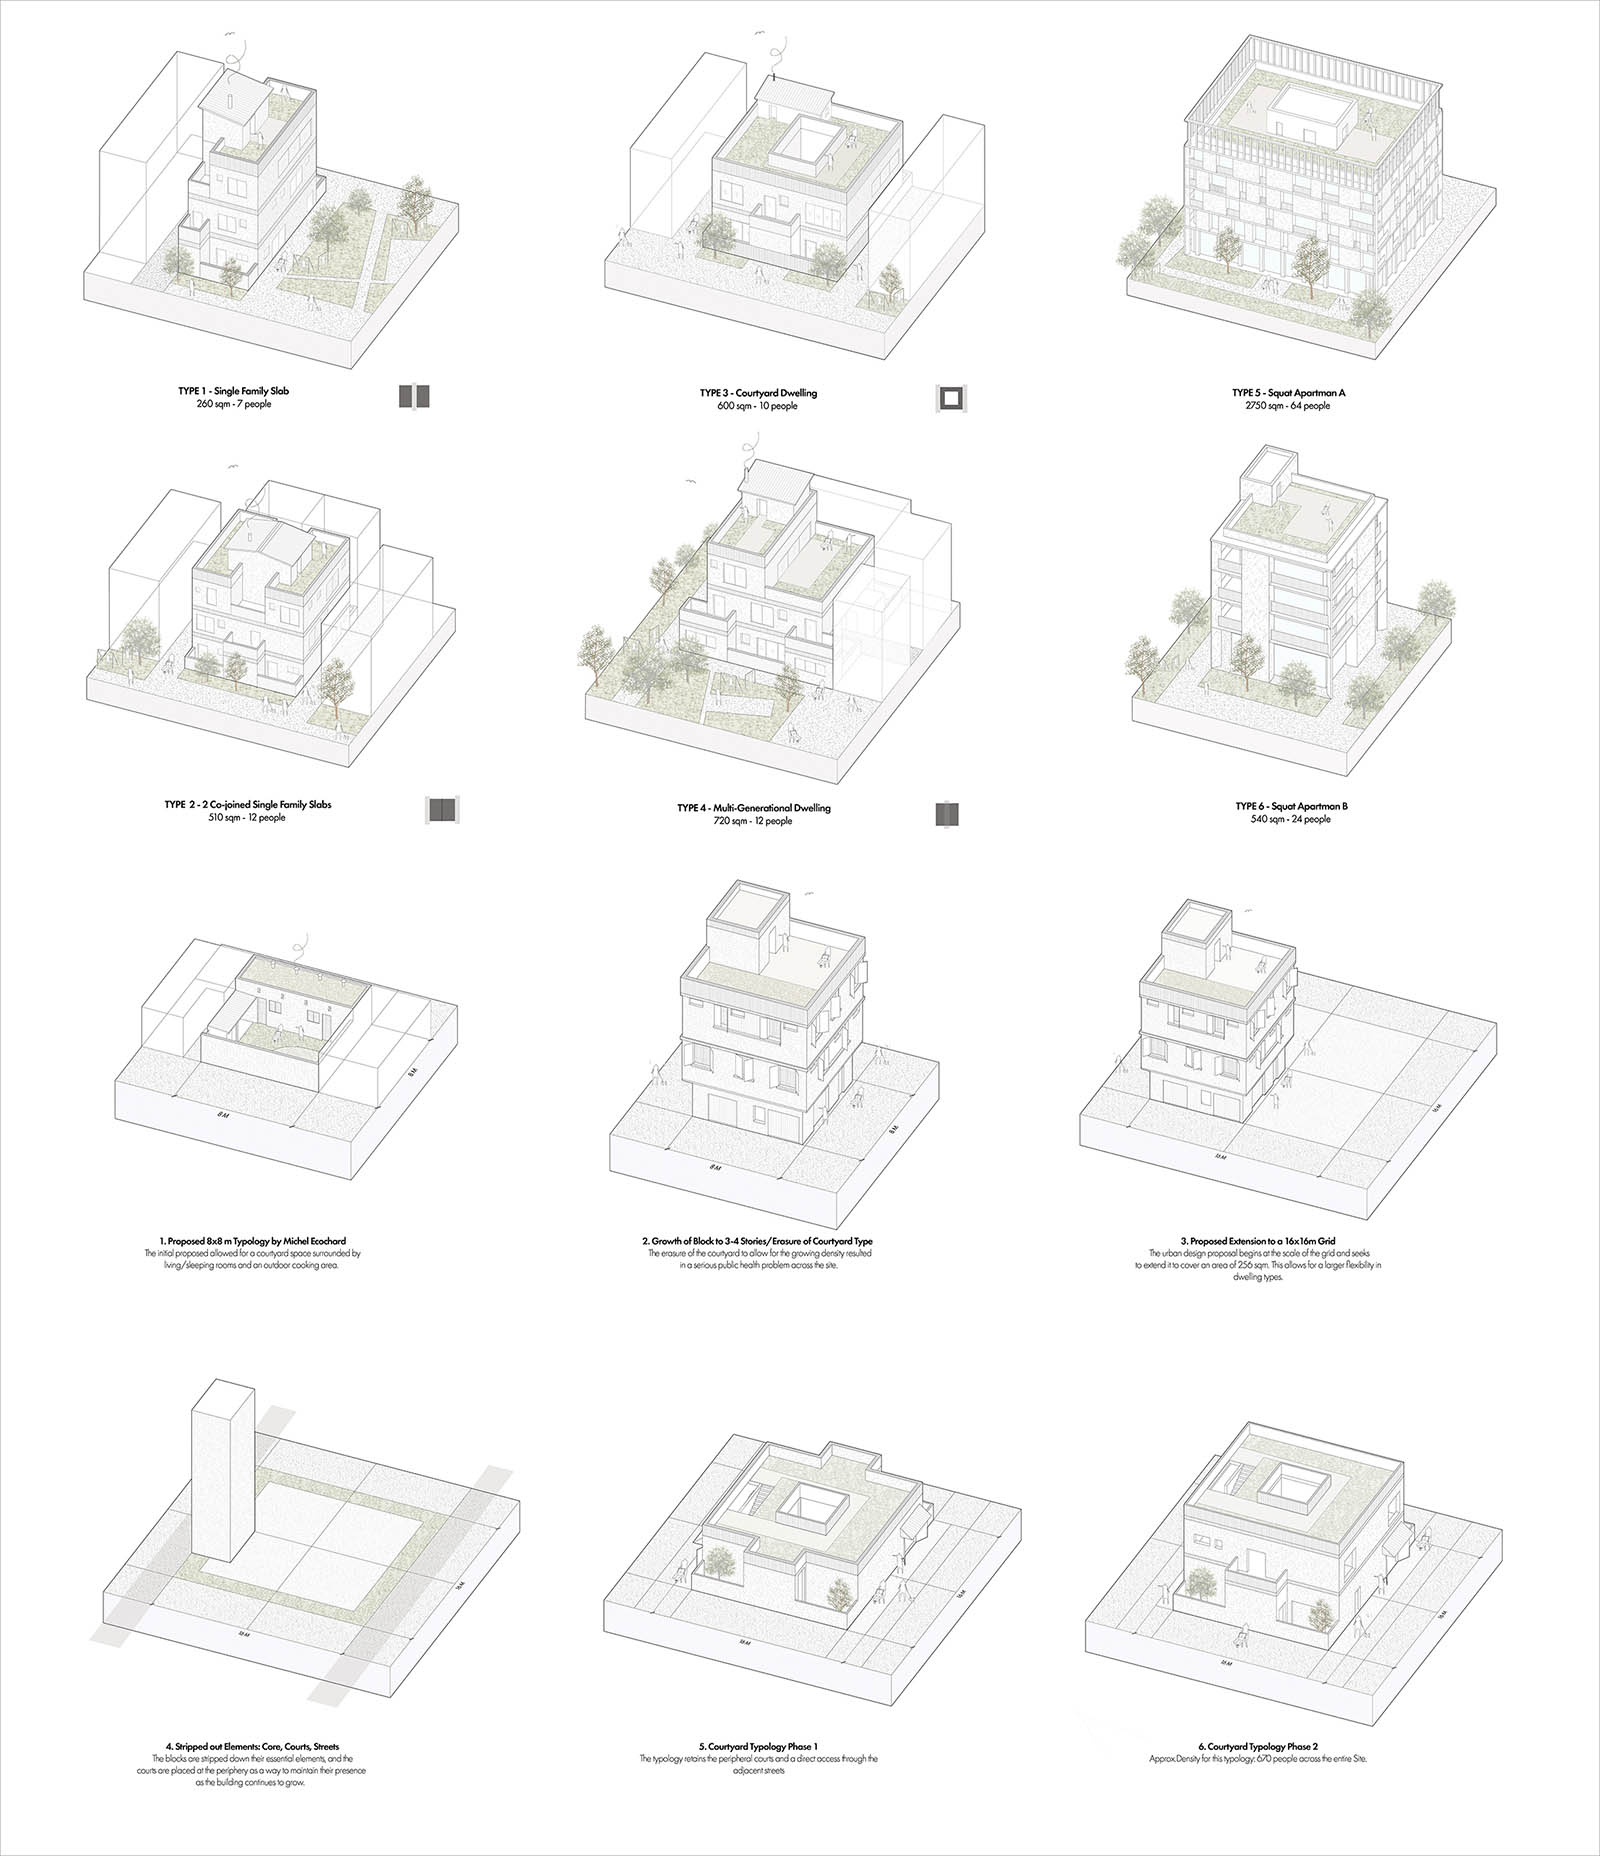 A rendering showing residential typologies and the design strategy at the architectural scale.